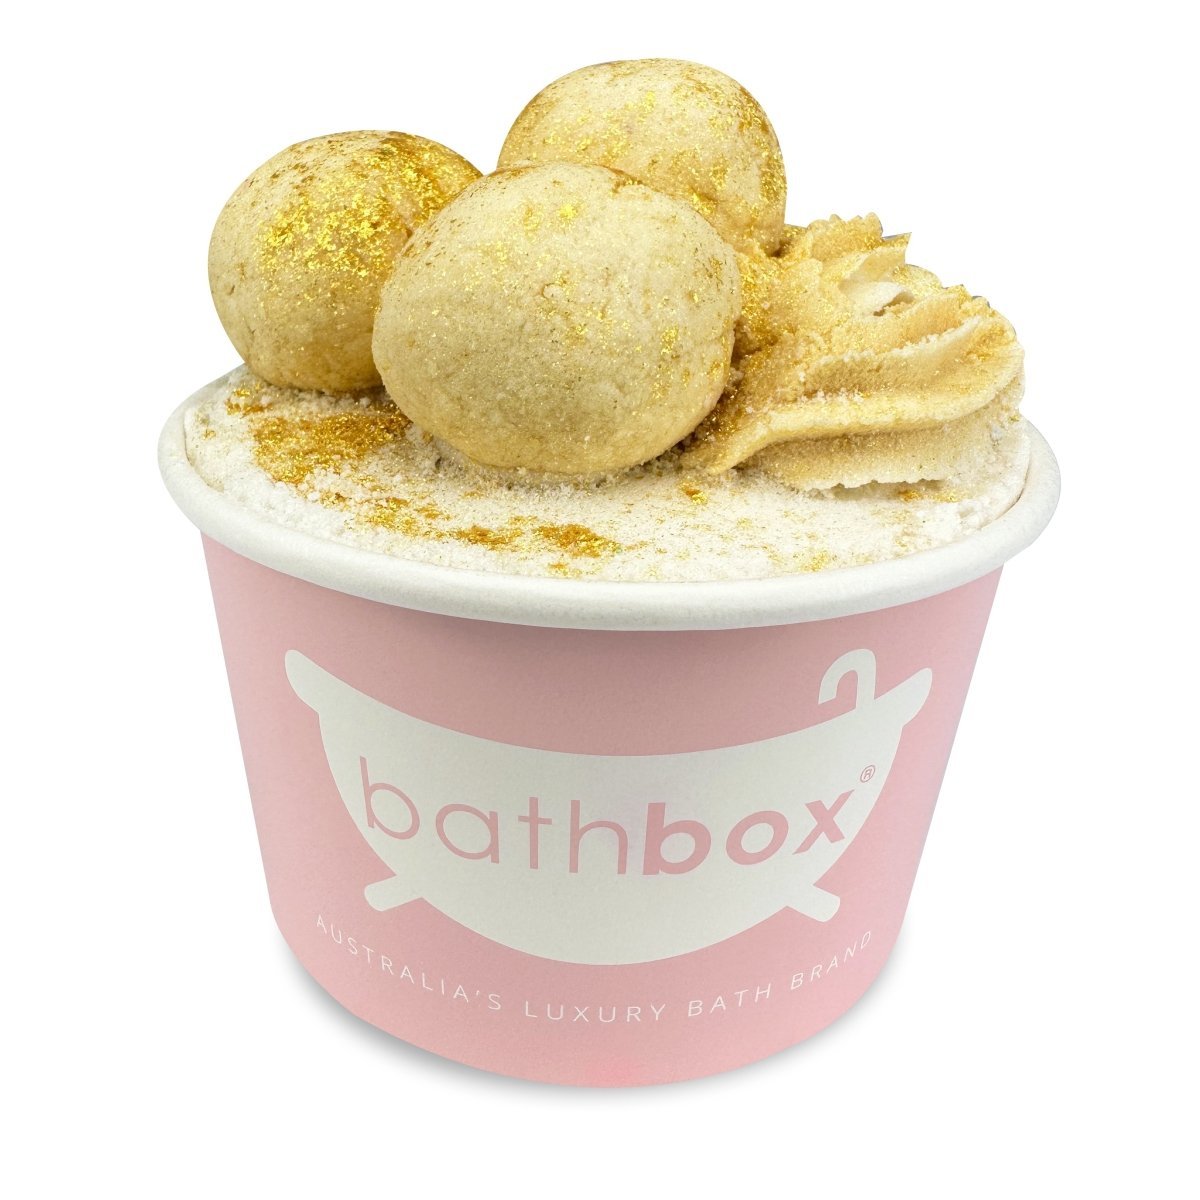 Cookie Dough Bath Bomb Ice Cream Cup for Kids & Adults - Large Colourful Glitter & Sprinkles - Made in Australia by Bath Box